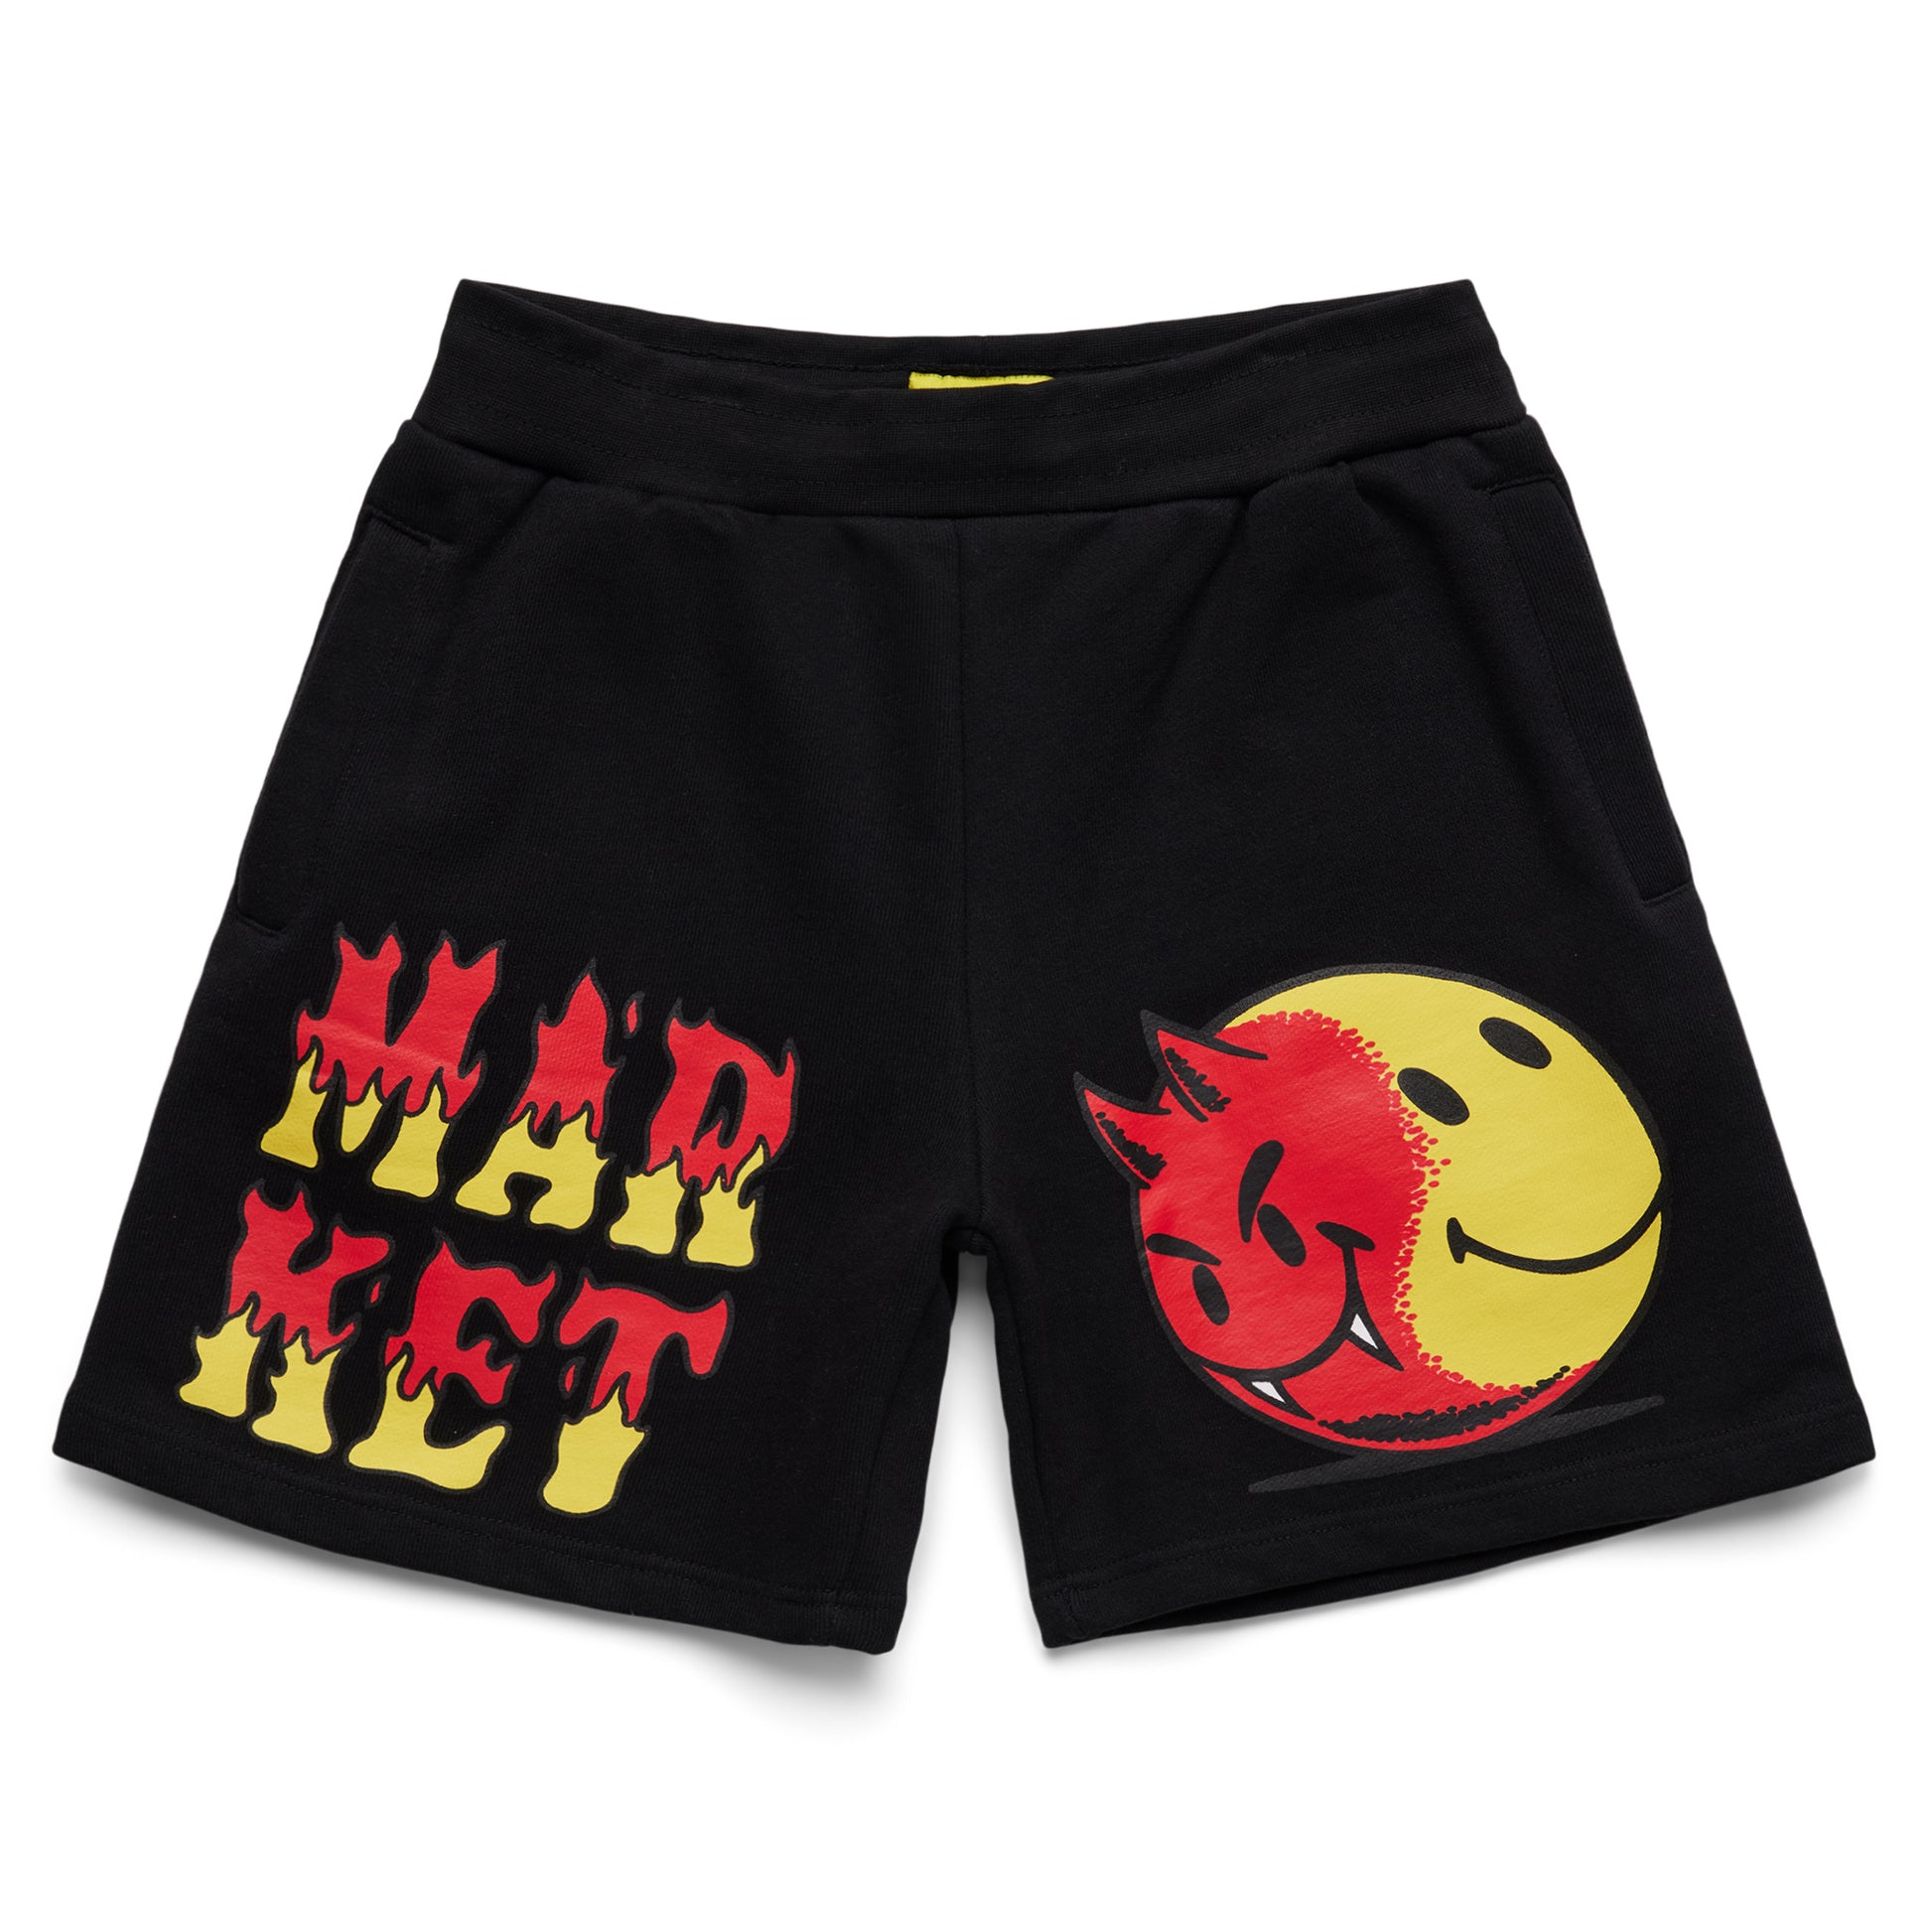 MARKET clothing brand SMILEY GOOD VS EVIL SWEATSHORTS. Find more graphic tees, sweatpants, shorts and more bottoms at MarketStudios.com. Formally Chinatown Market. 